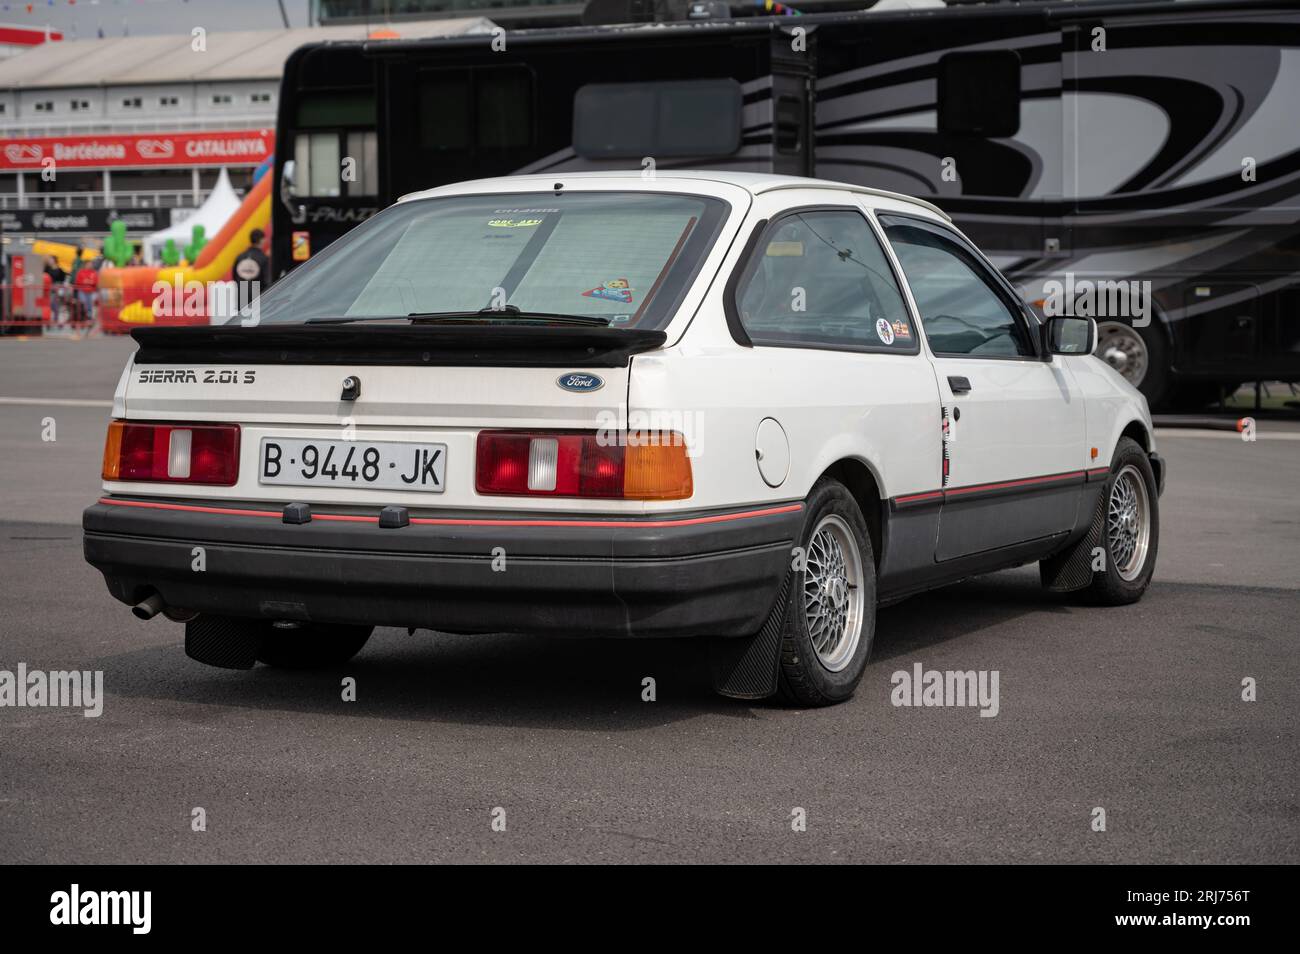 Rear view of a classic white Ford Sierra 2.0i S Stock Photo